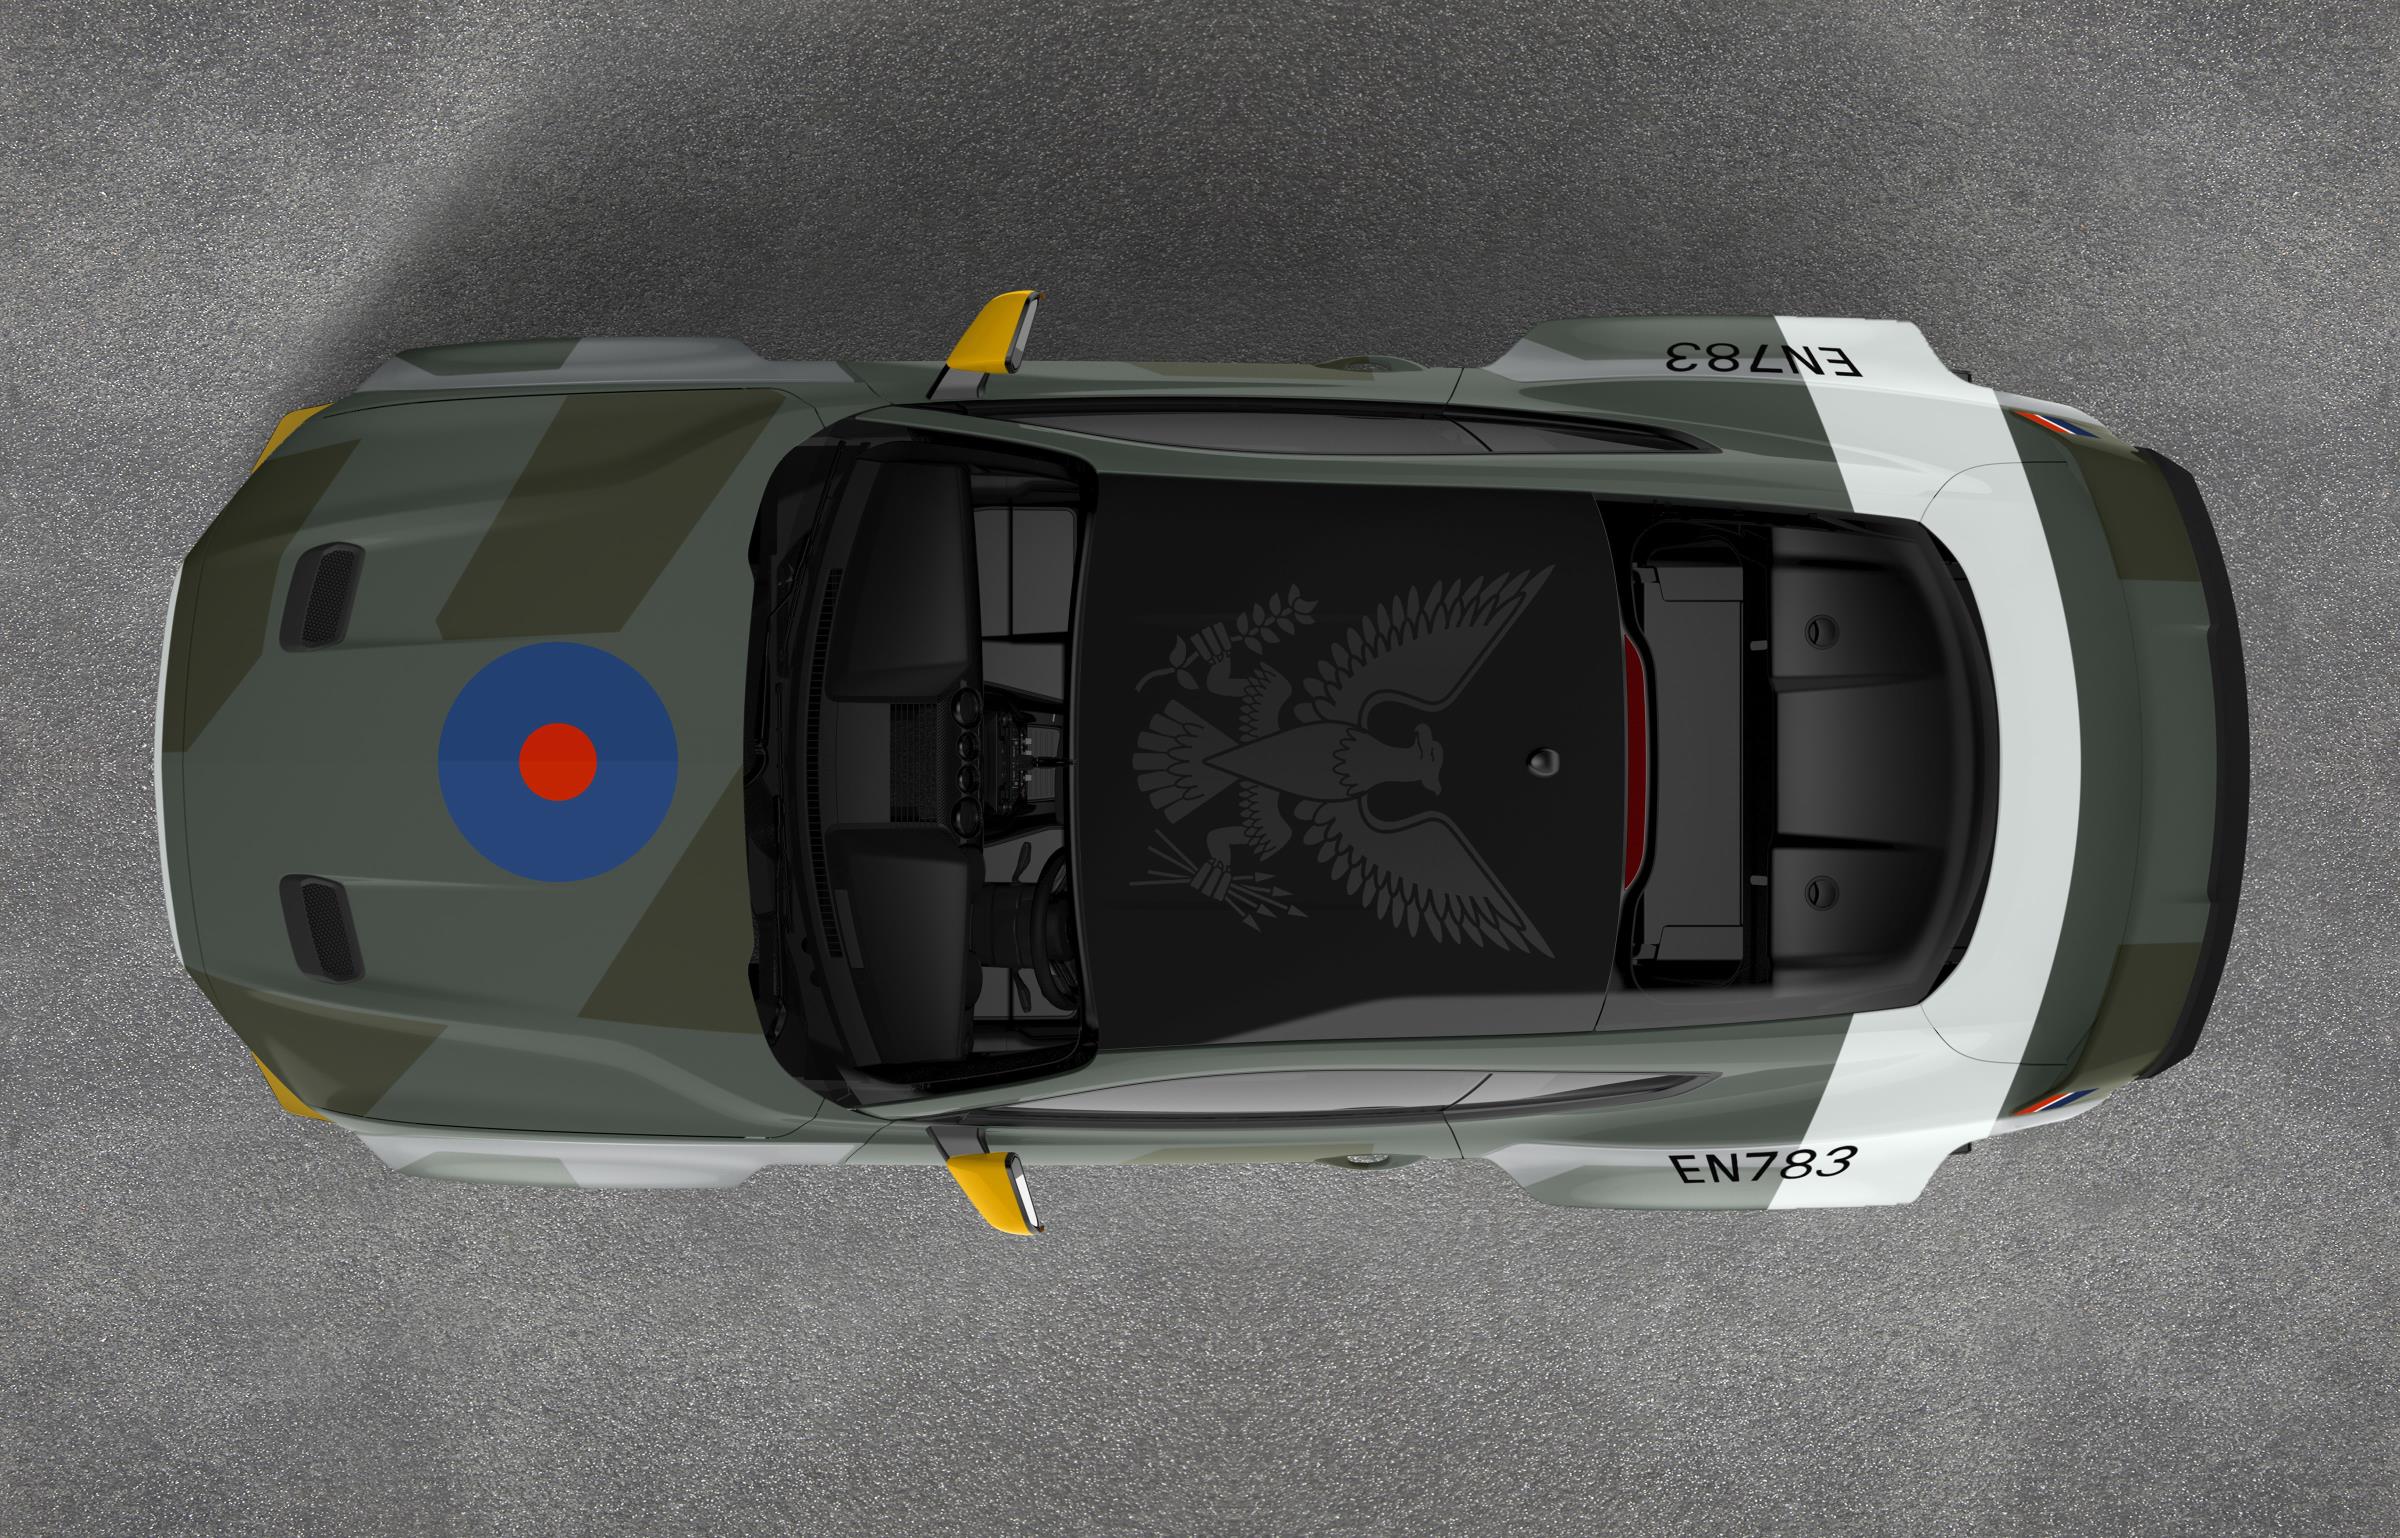 This modified Ford Mustang GT pays homage to the Eagle Squadron, a group of American pilots who fought on behalf of the British before the U.S. was officially involved in World War II. | Ford photo